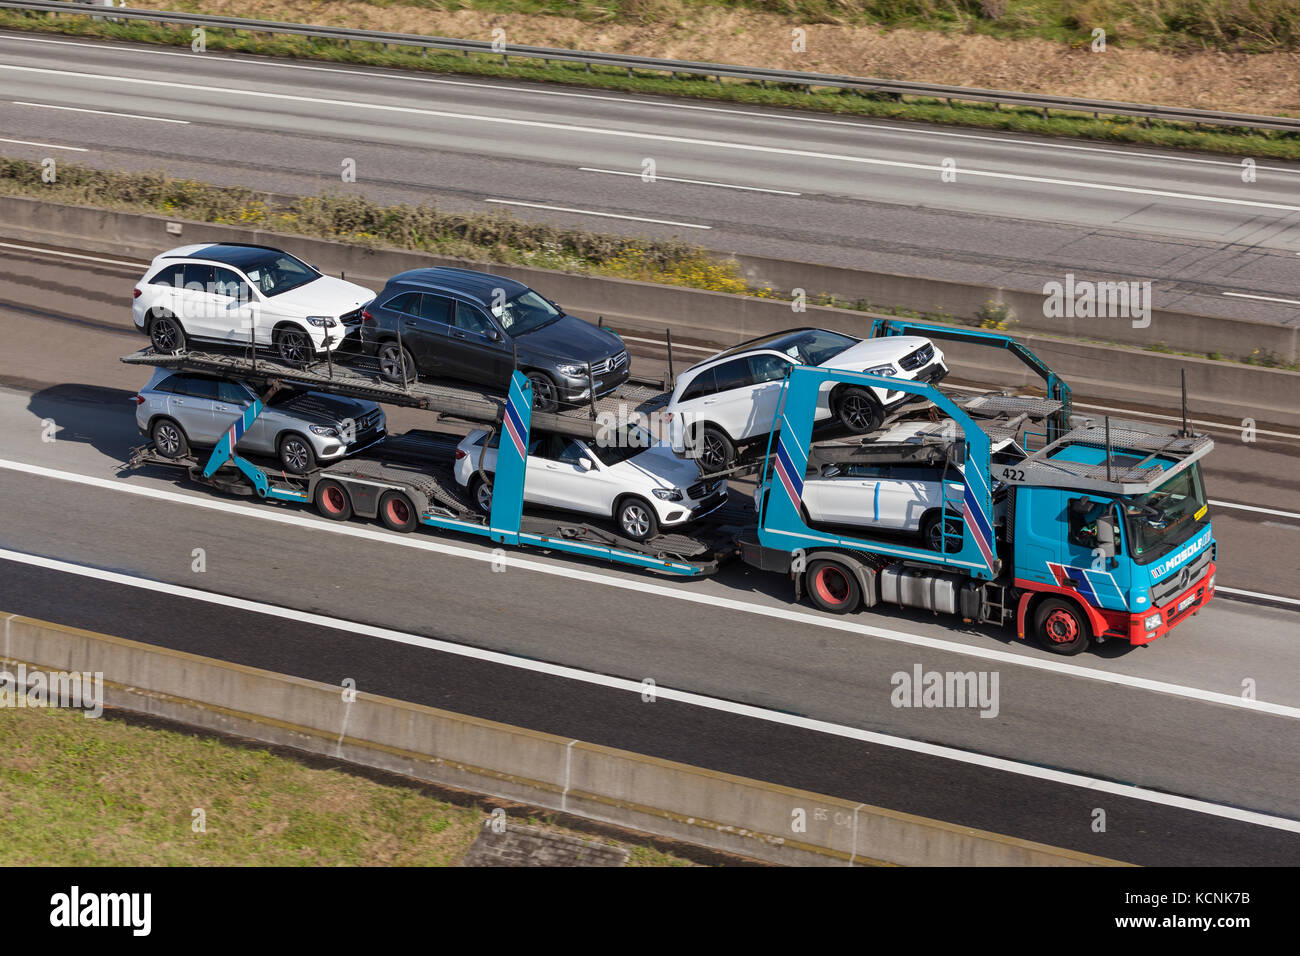 Frankfurt, Germany - Sep 19, 2017: Mercedes Benz Actros car transporter hauls Mercedes Benz SUVs along the A45 highway in Germany Stock Photo